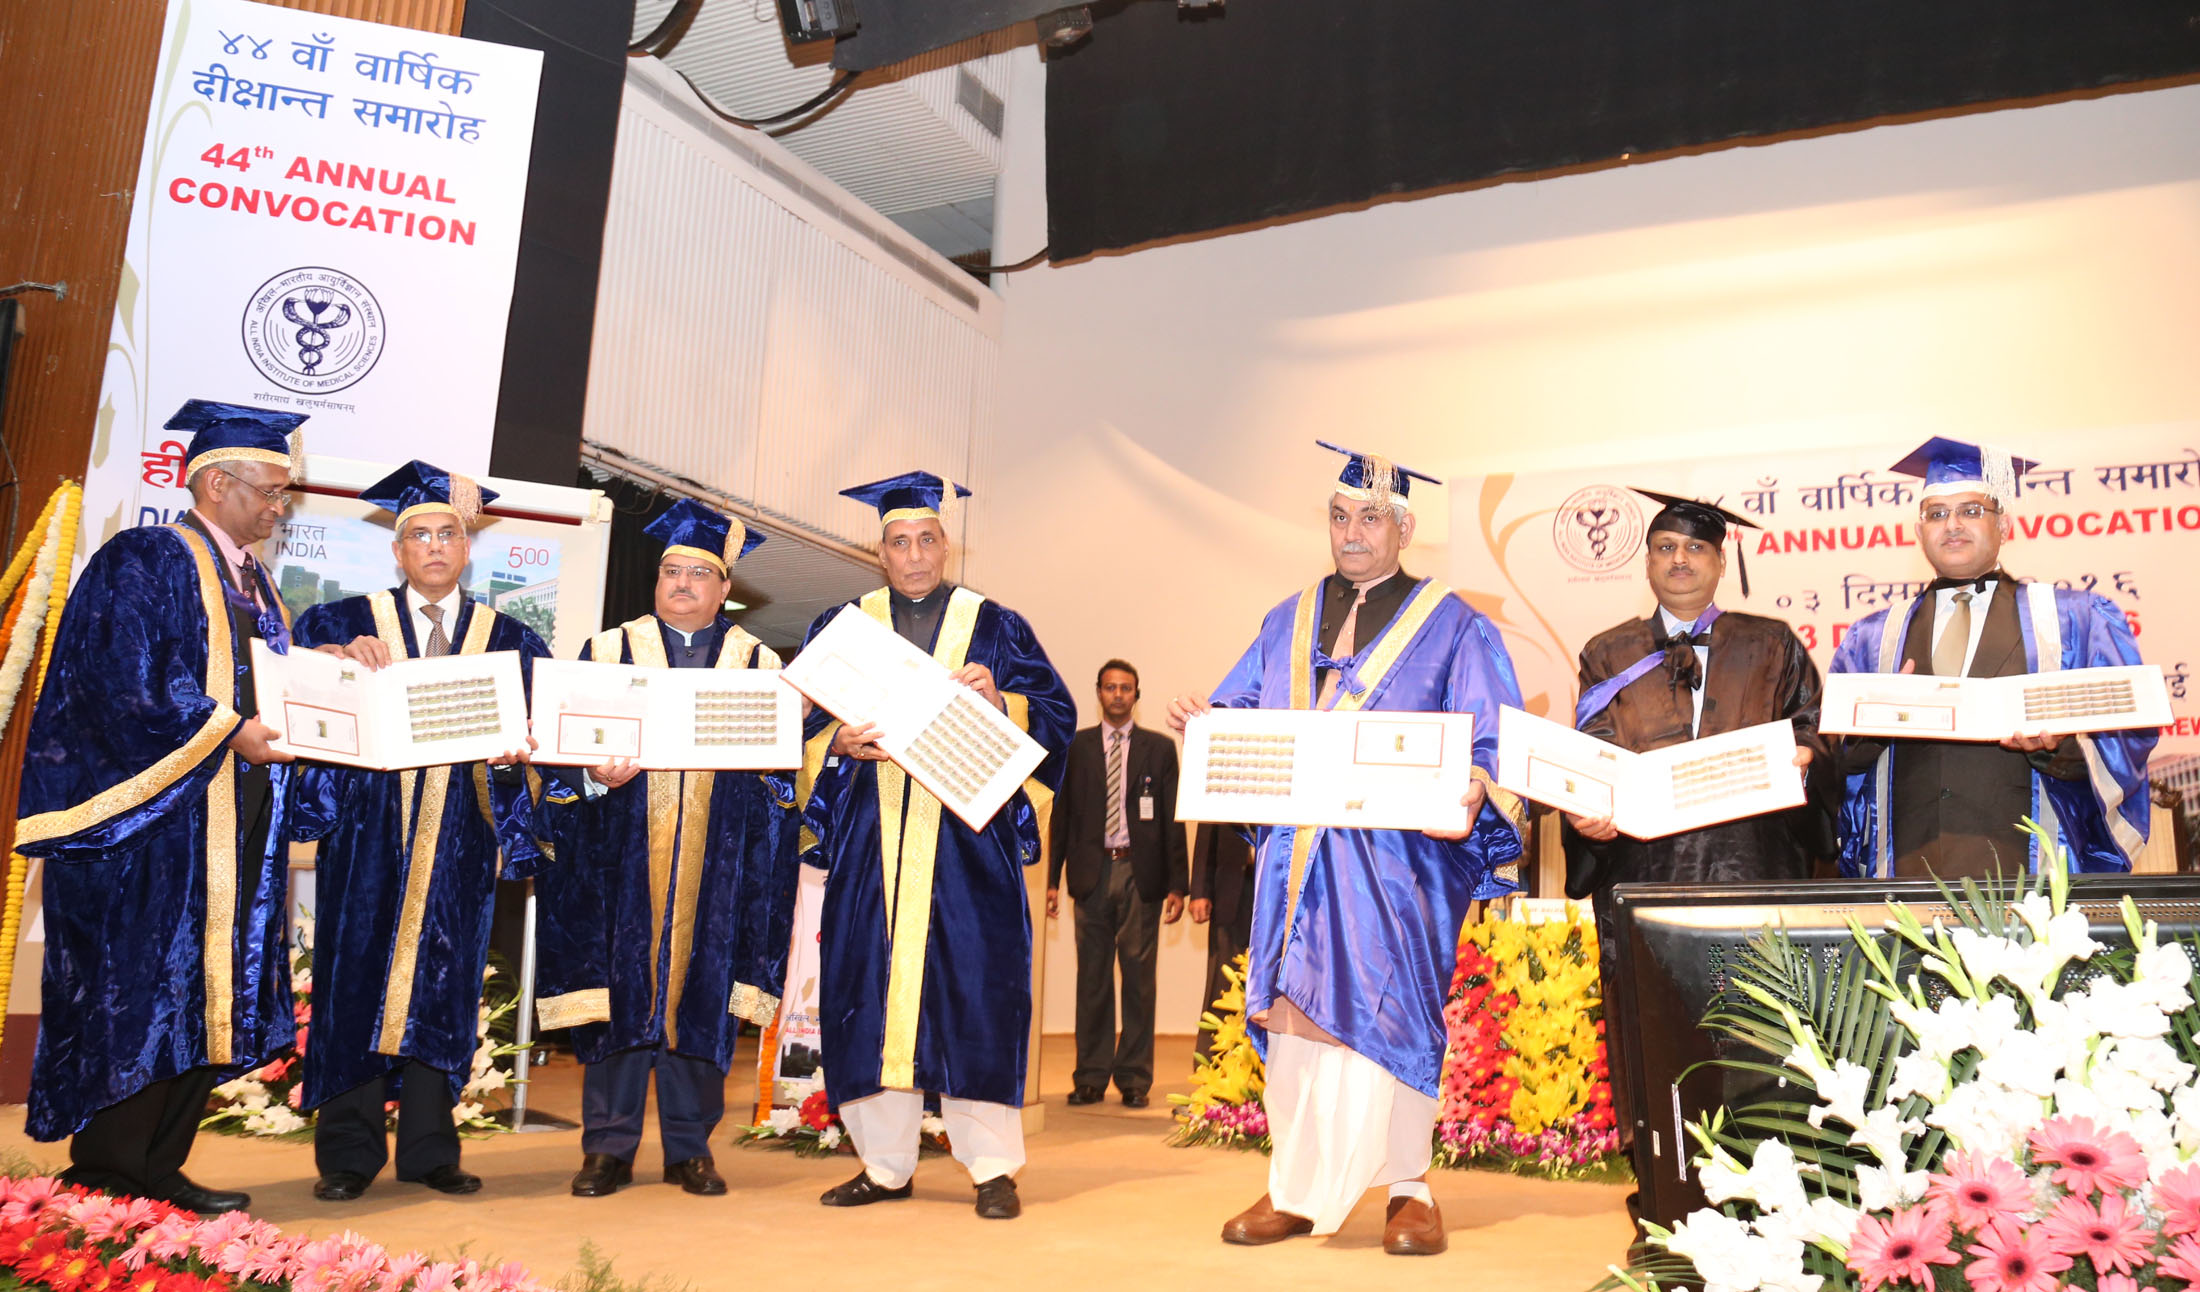 The Union Home Minister, Shri Rajnath Singh releasing the postage stamp at the 44th Annual Convocation of the AIIMS, in New Delhi on December 03, 2016.